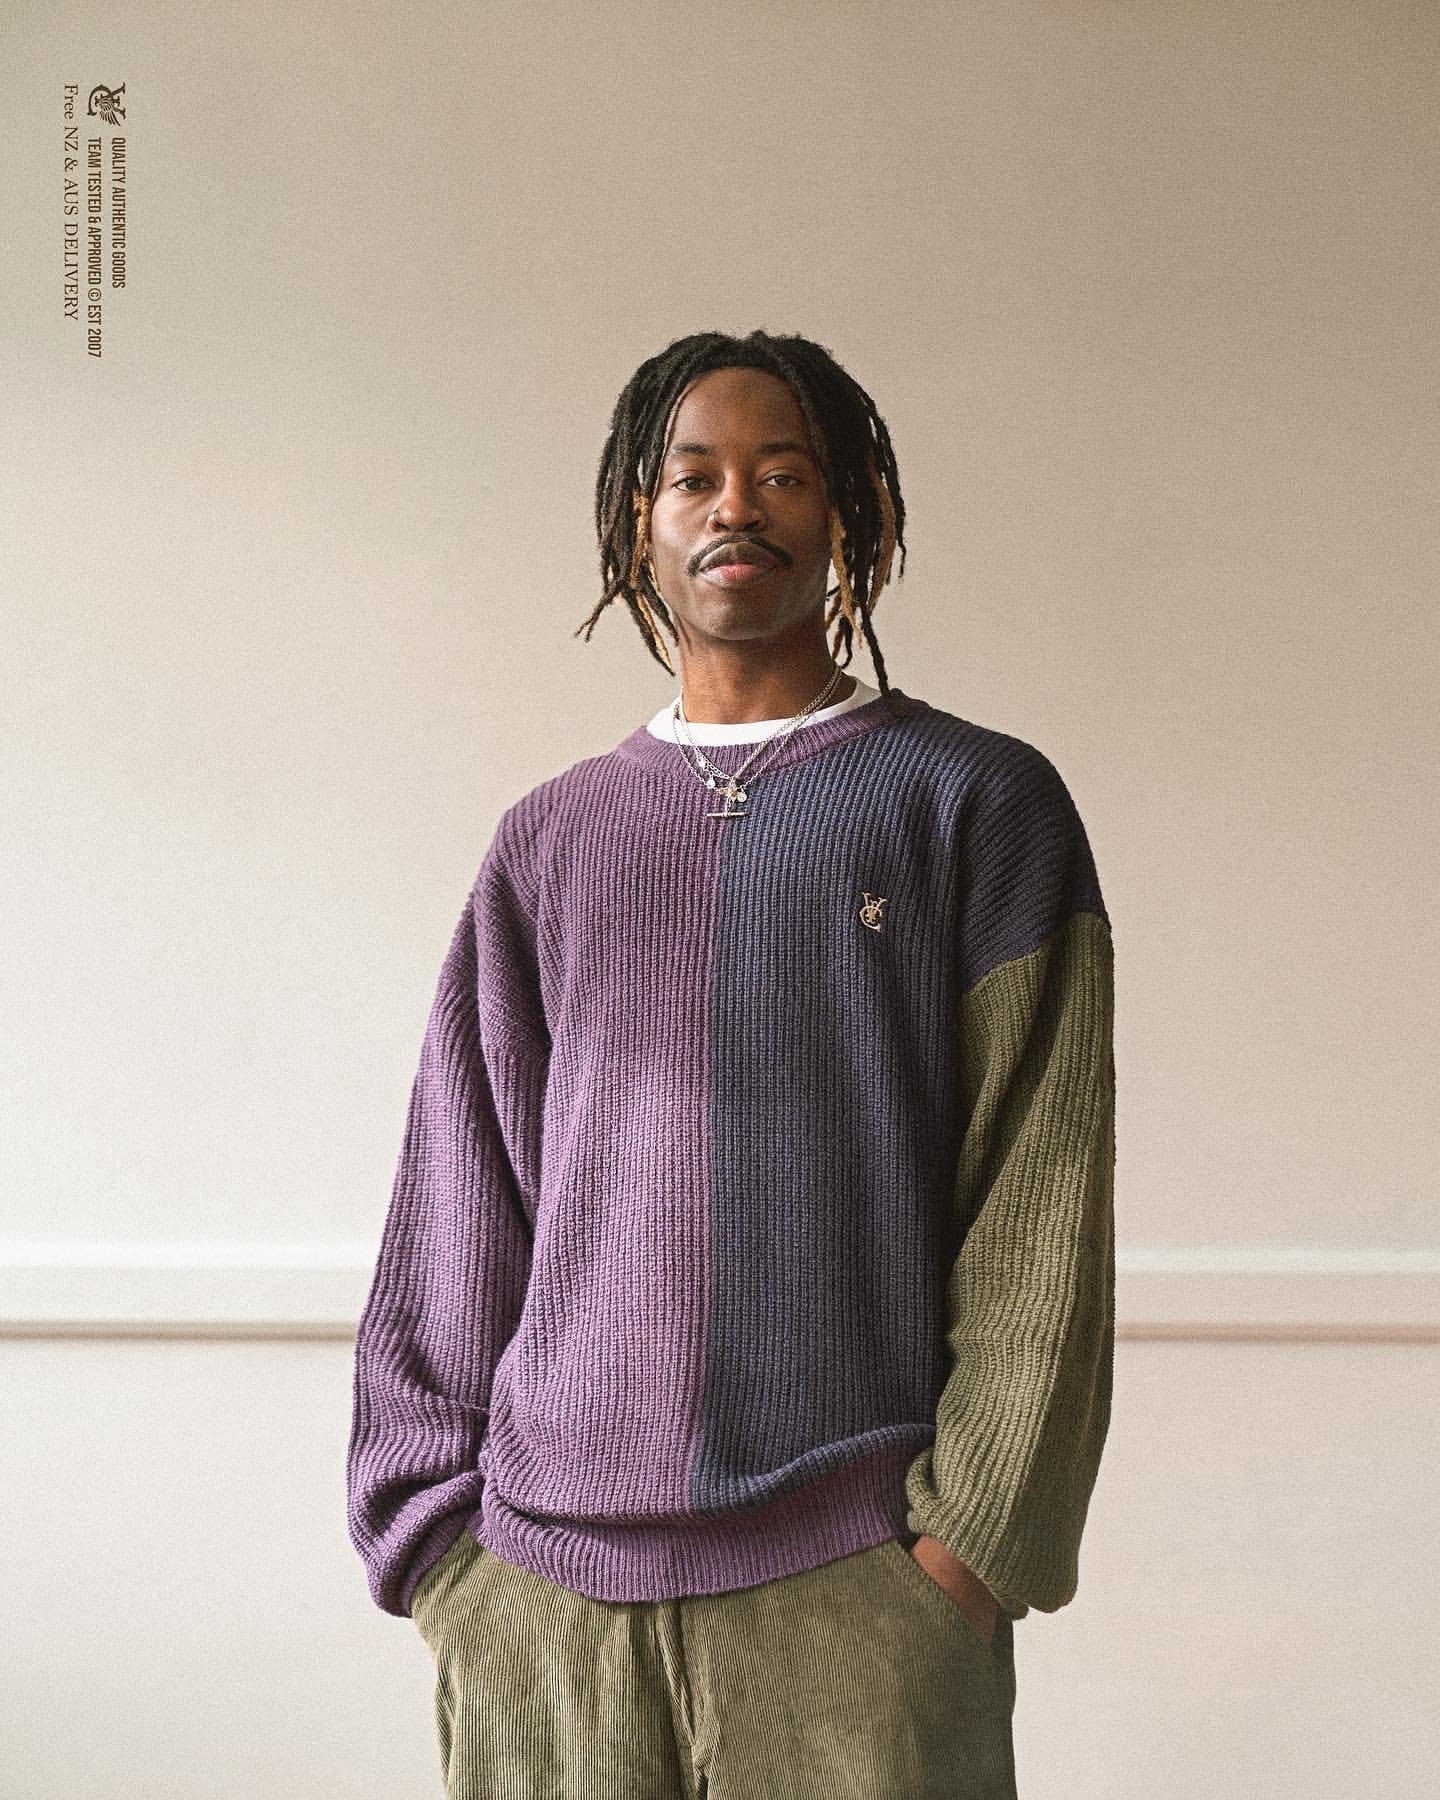 Premium quality mohair-blend knit sweater by New Zealand skate and streetwear clothing label VIC Apparel. Classic colour block 90's design. Regular fit.